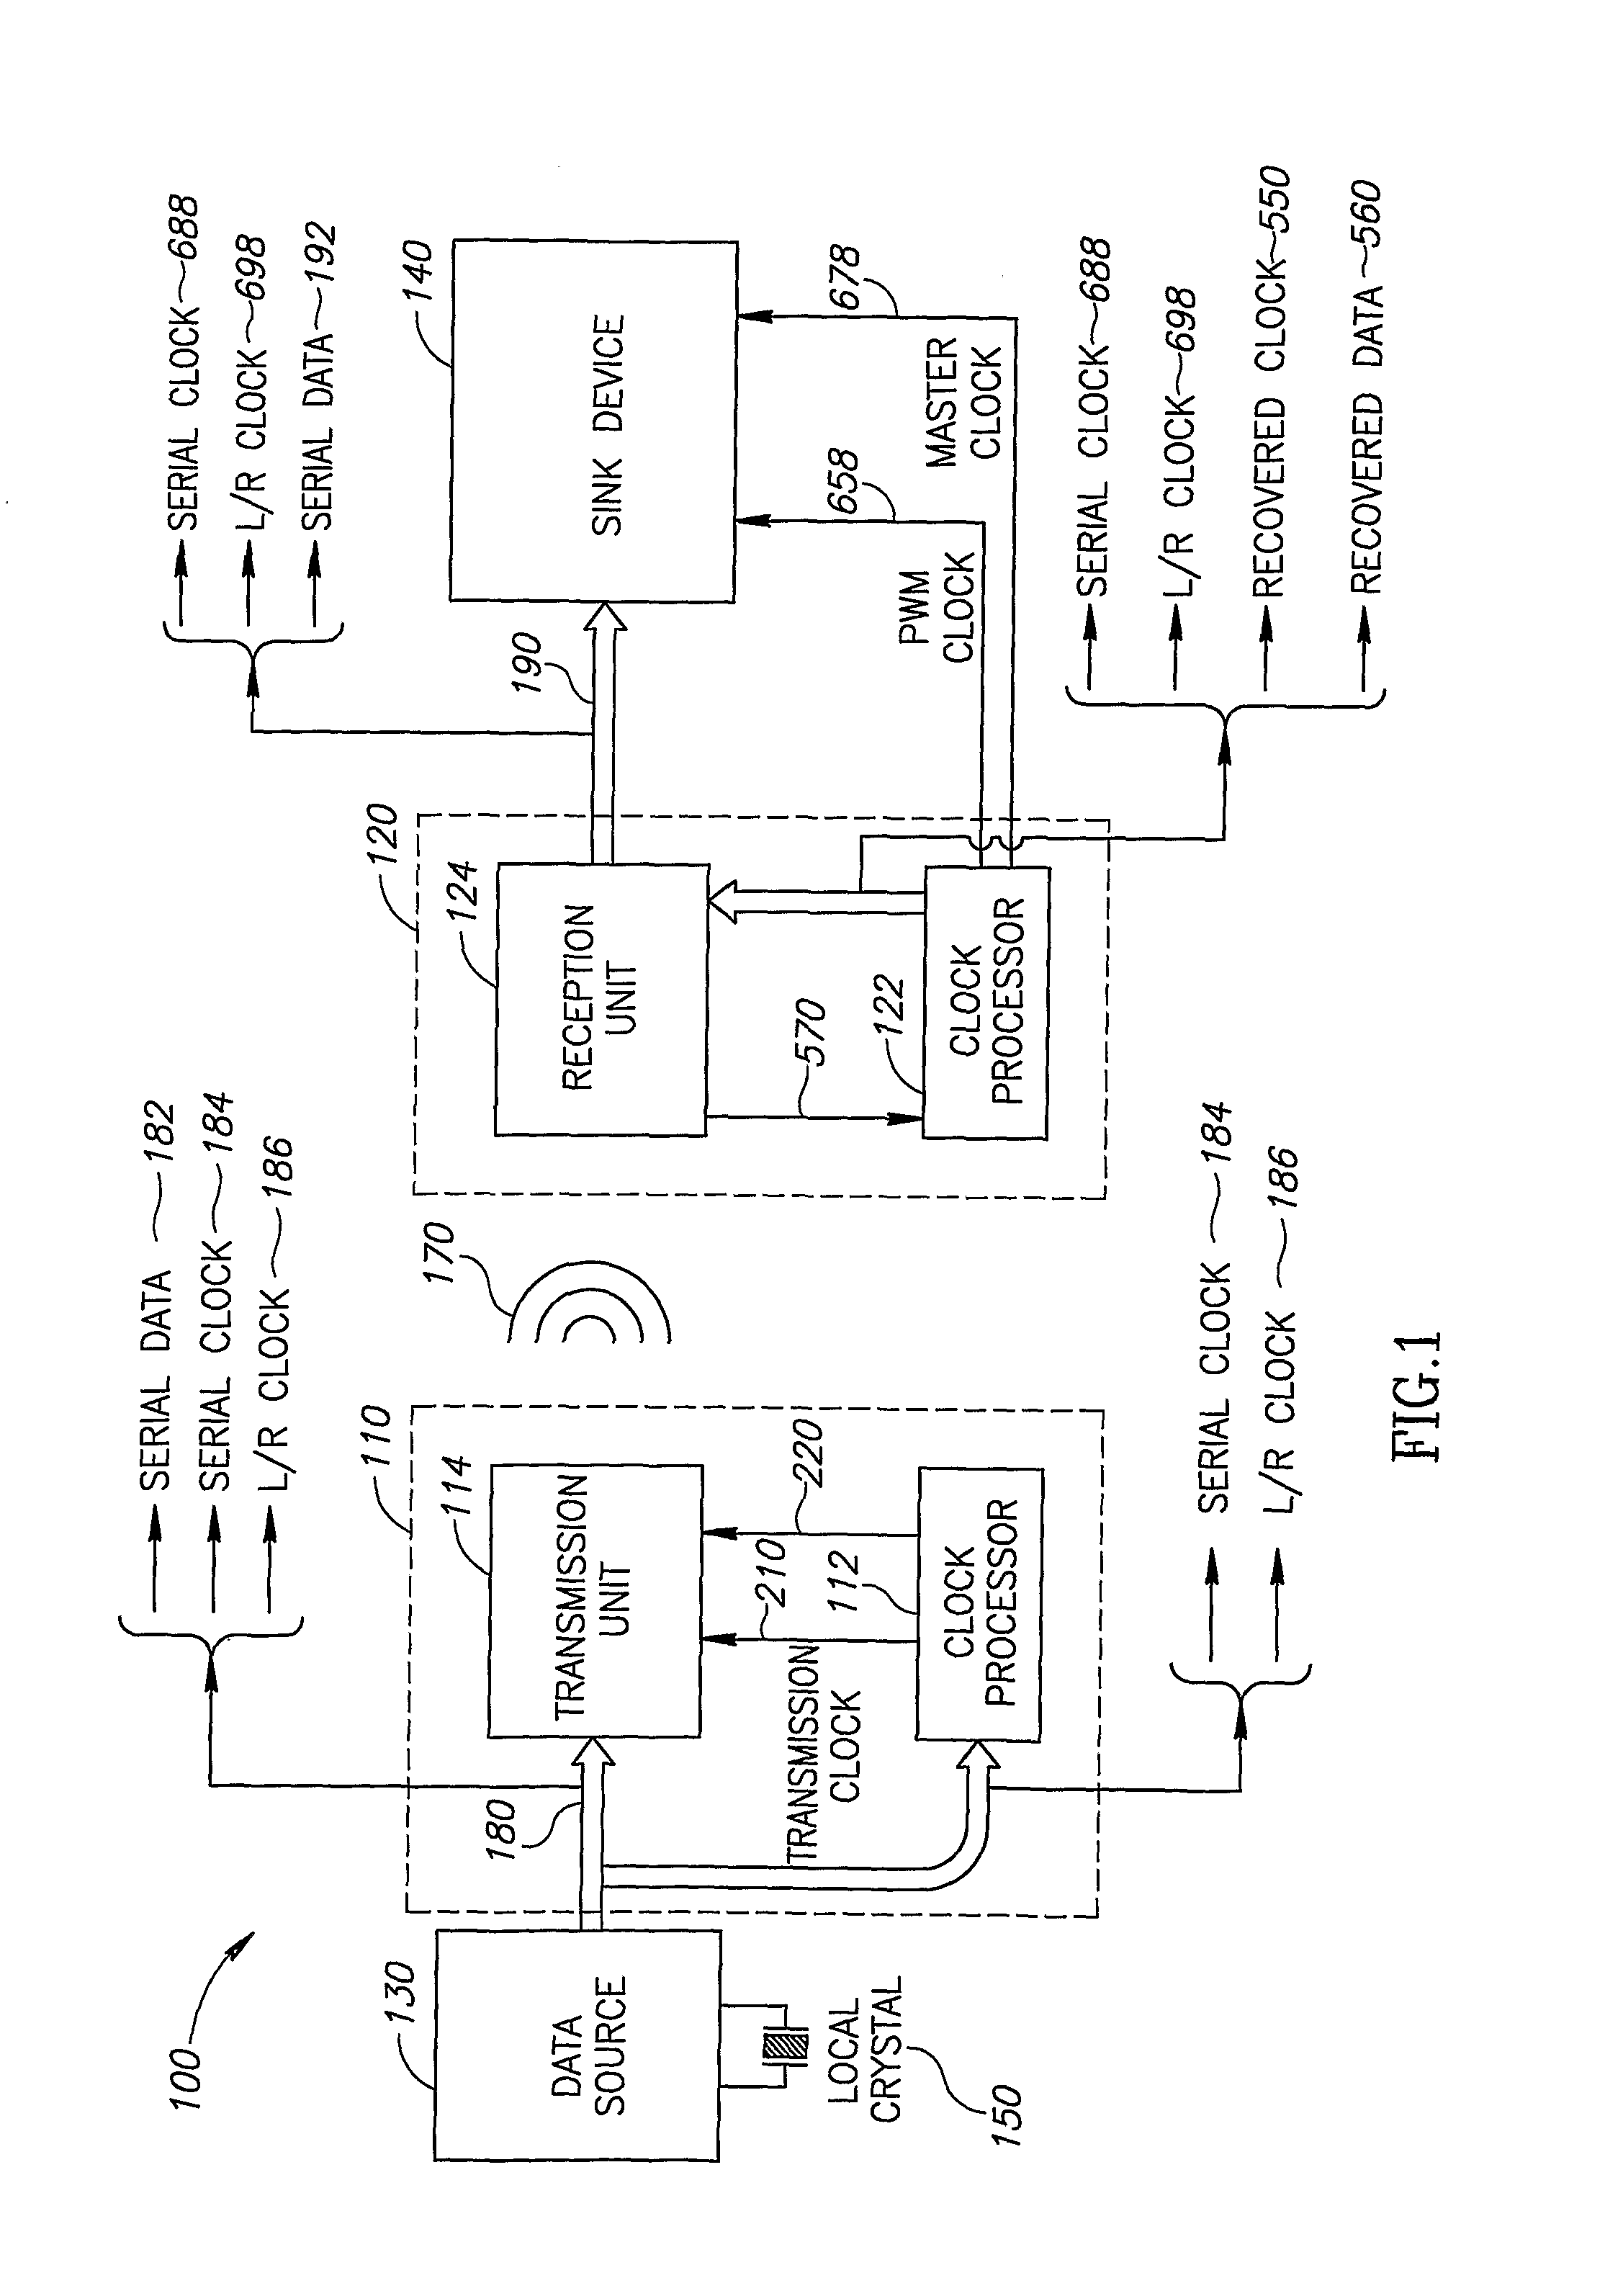 Low Jitter Clock Recovery from a Digital Baseband Data Signal Transmitted Over a Wireless Medium